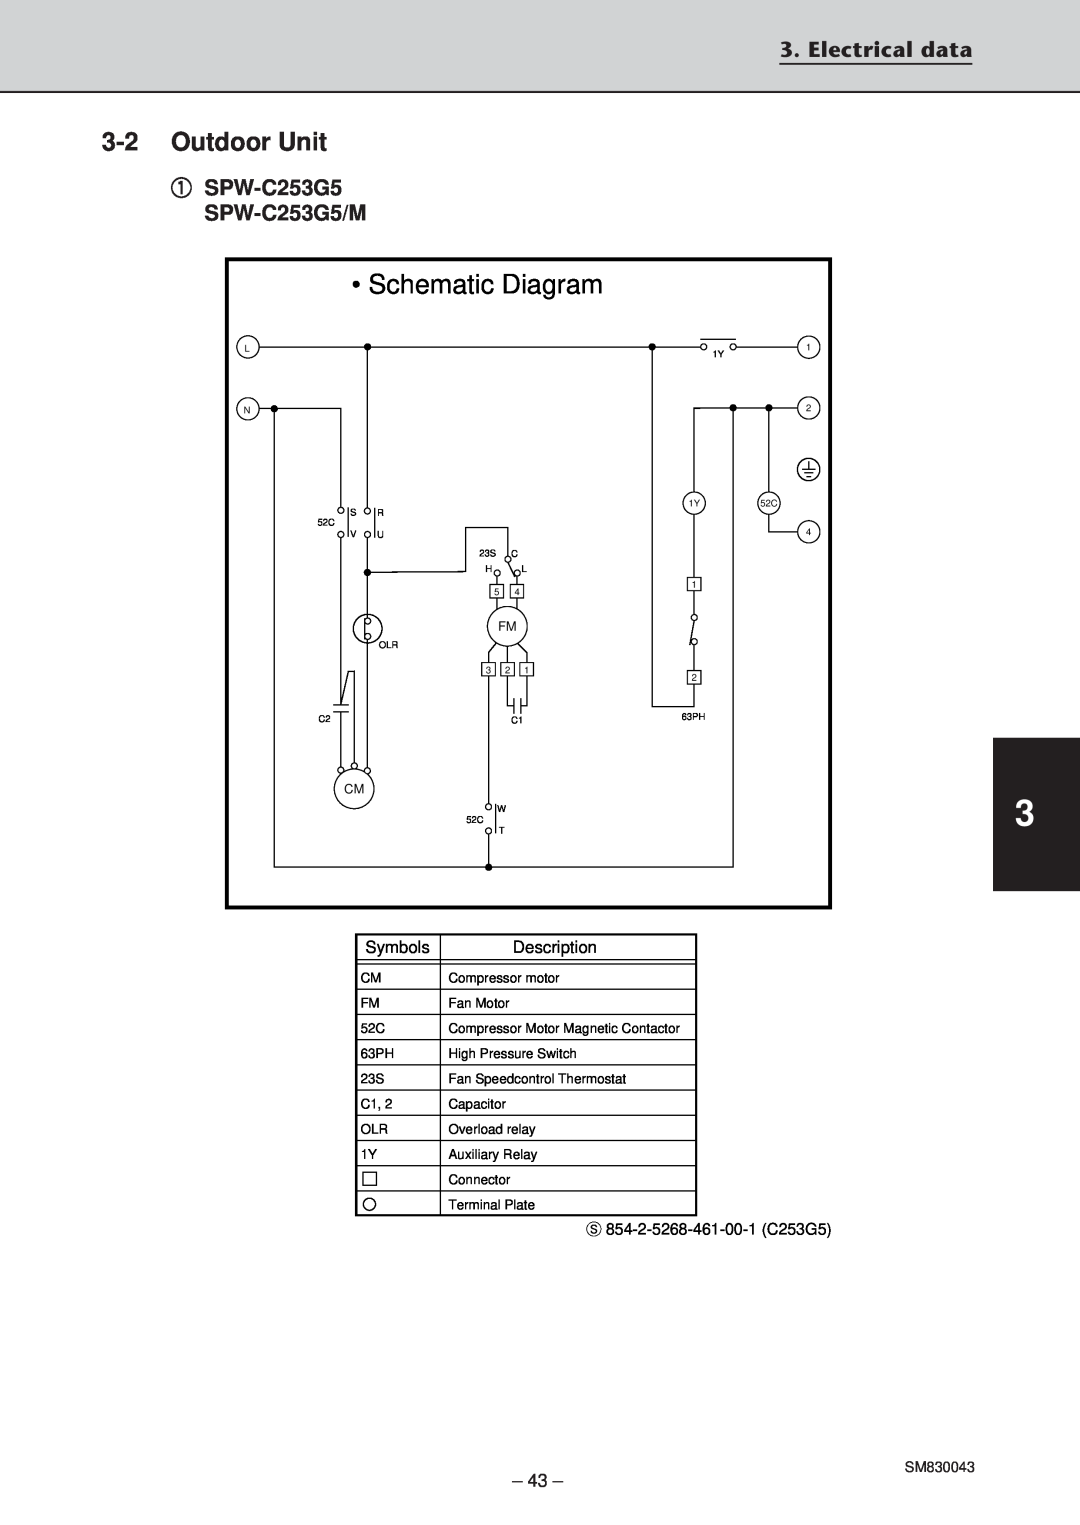 Sanyo SPW-T303G56, SPW-T363GS56, SPW-T483G56 Schematic Diagram, 3-2Outdoor Unit, Electrical data, SPW-C253G5/M 